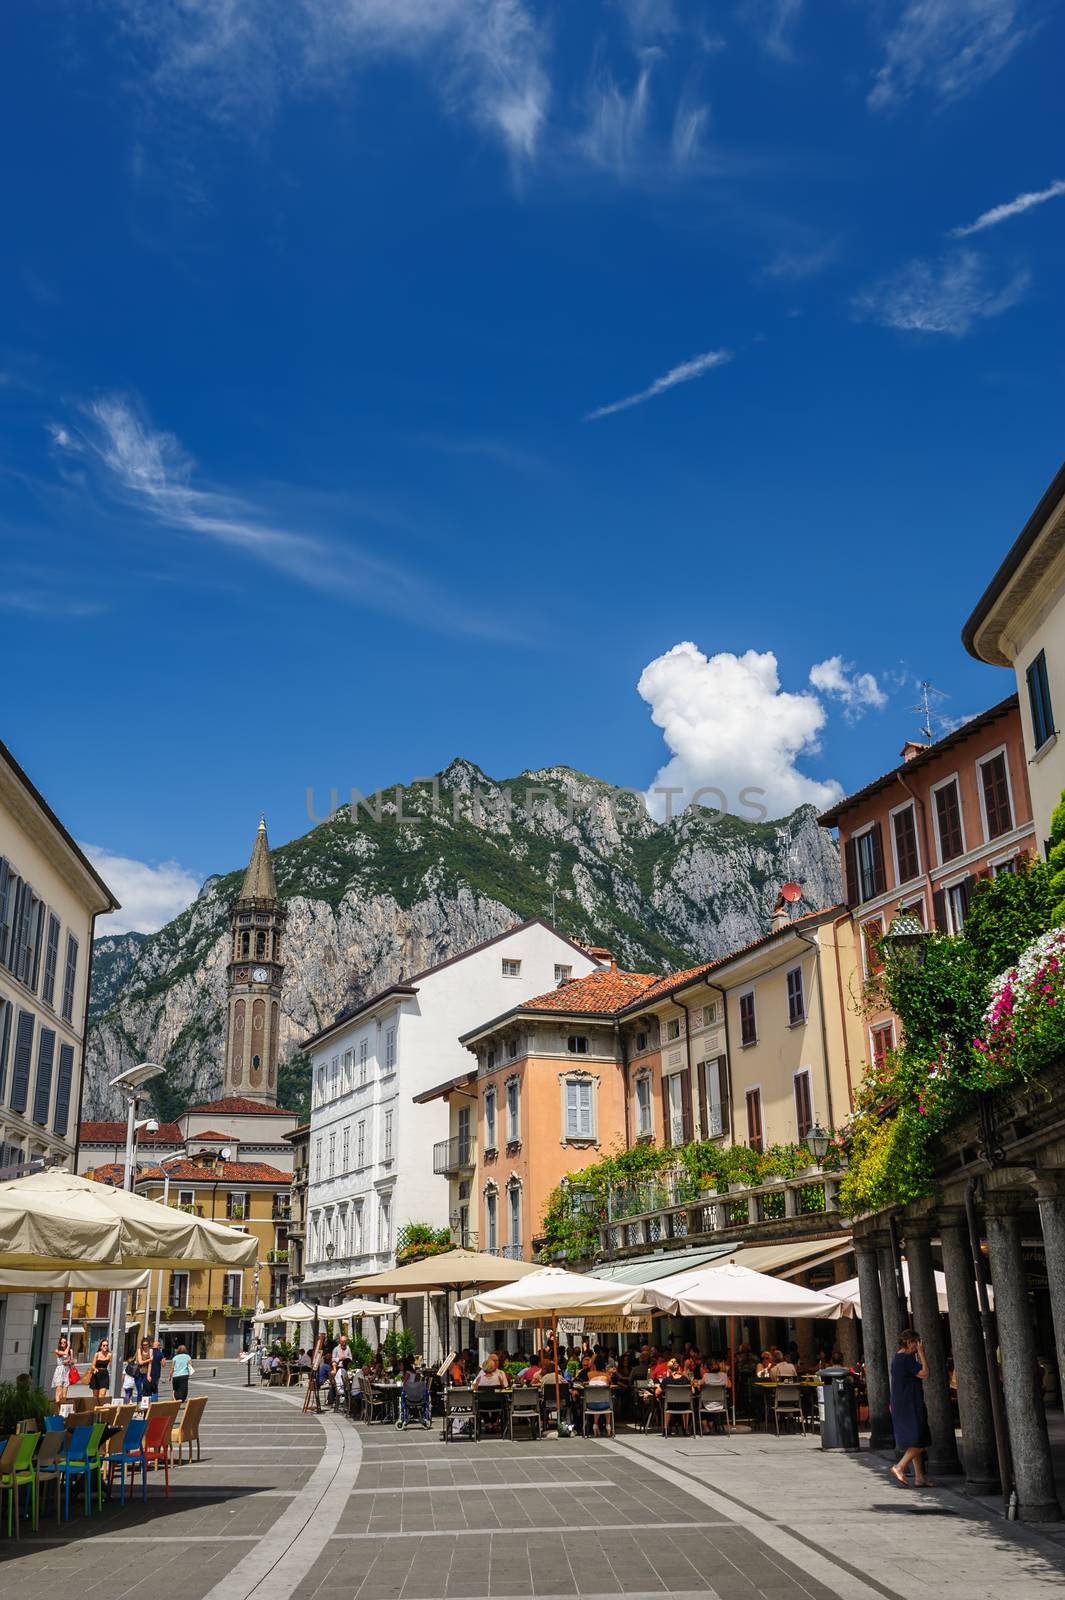 Lecco, Italy - August 17th, 2016: Central streets of Lecco town, with people relaxing in outdoor cafe and bell tower.